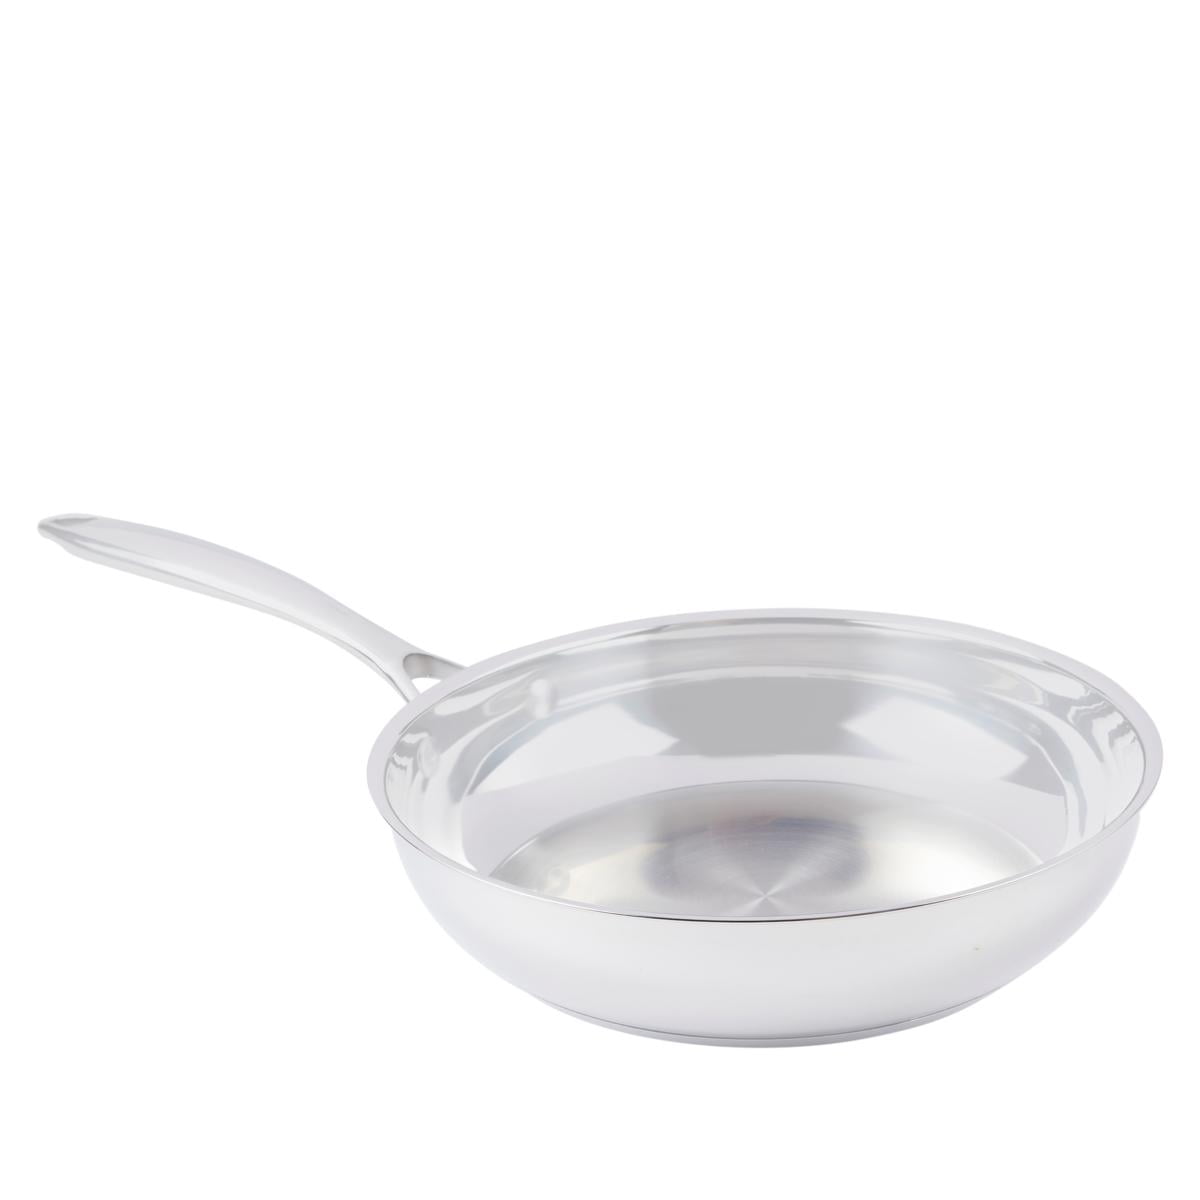 Wolfgang Puck 10 Stainless Steel Skillet Open Box